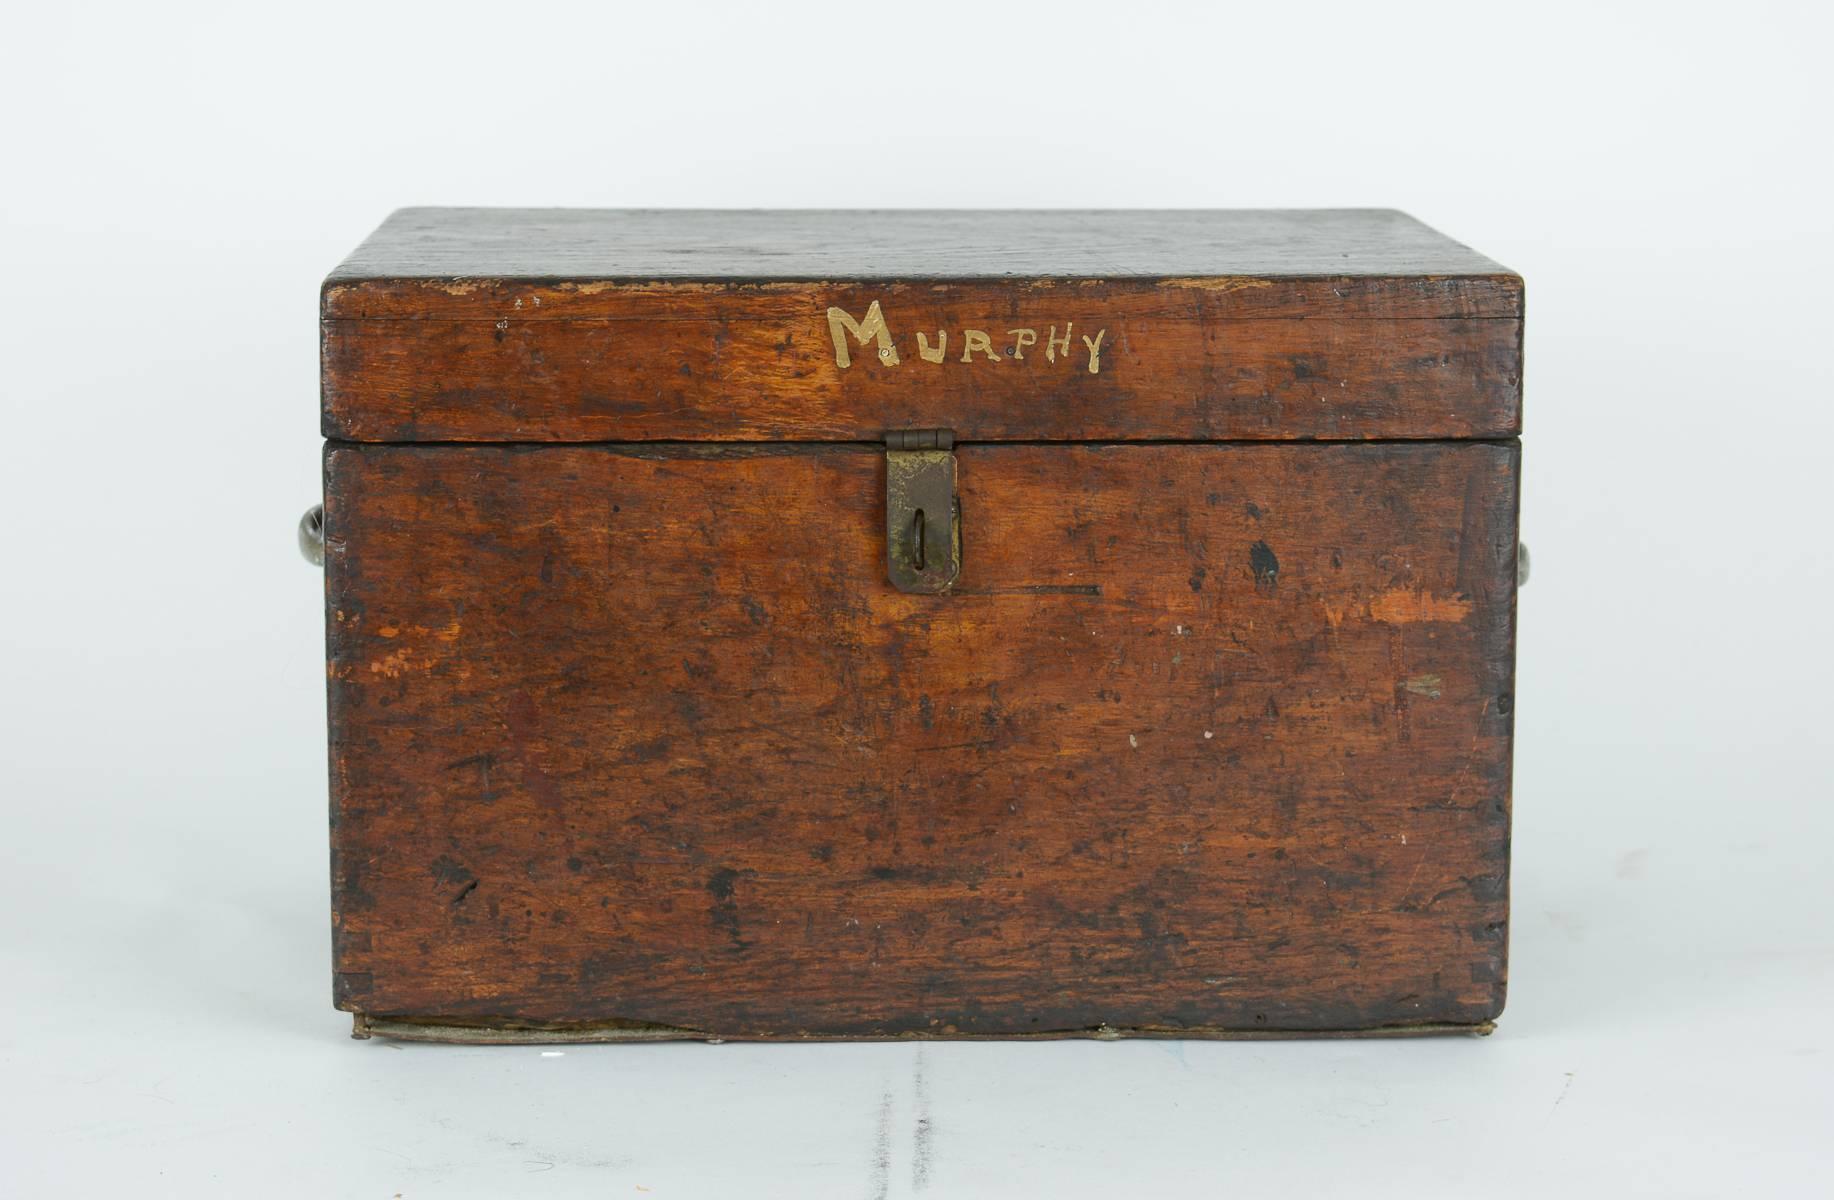 A 1920s painter's chest labeled 